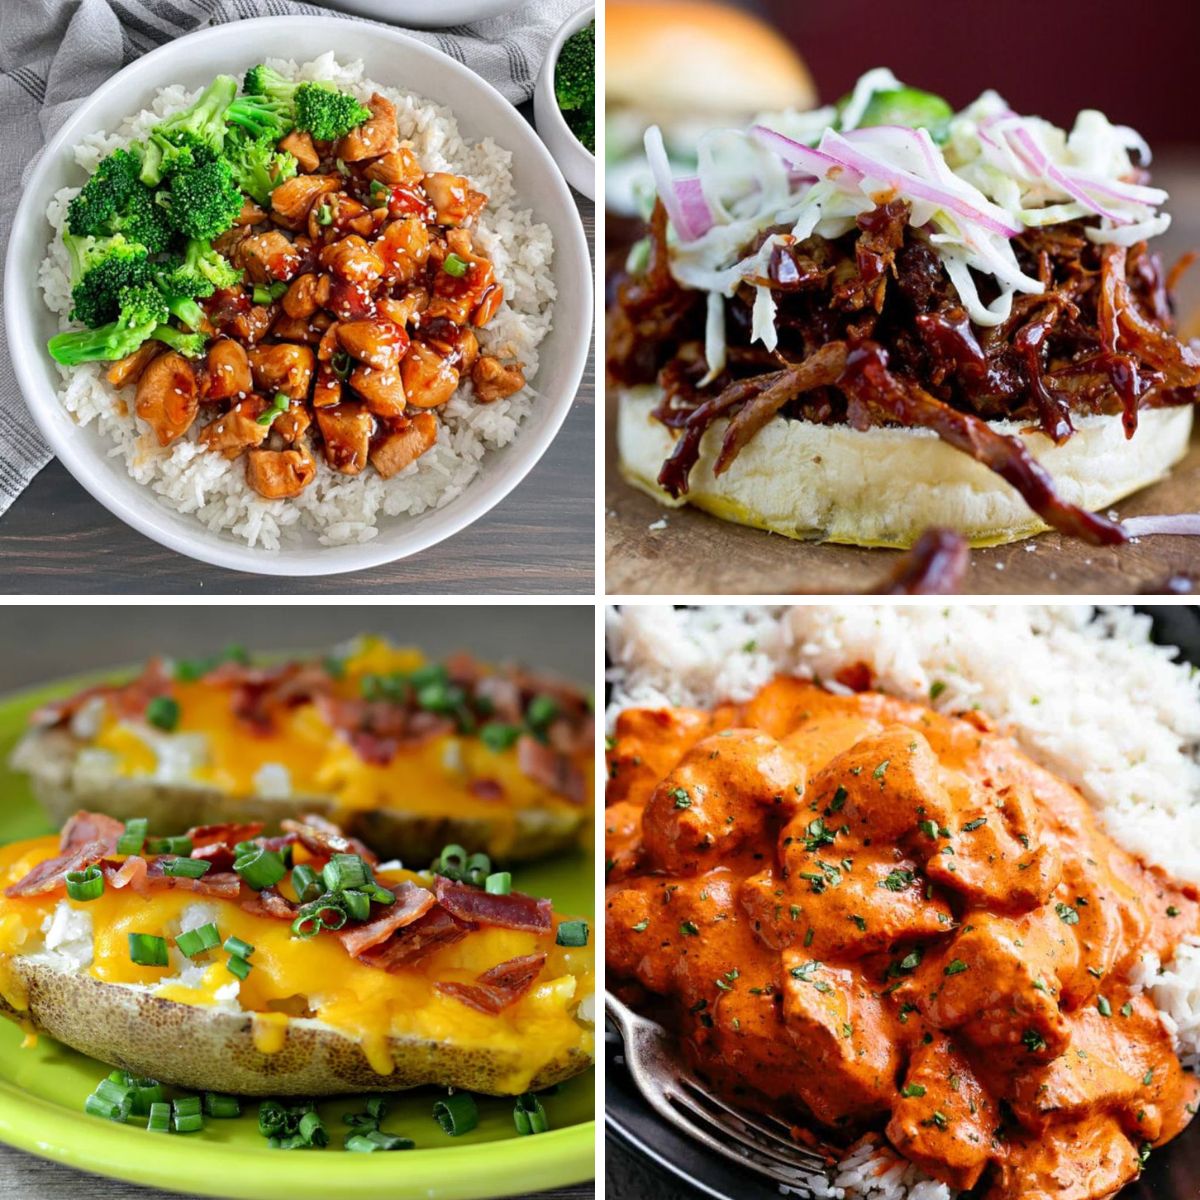 26 Wow-Worthy Packed Lunches To Brighten Up Your Day